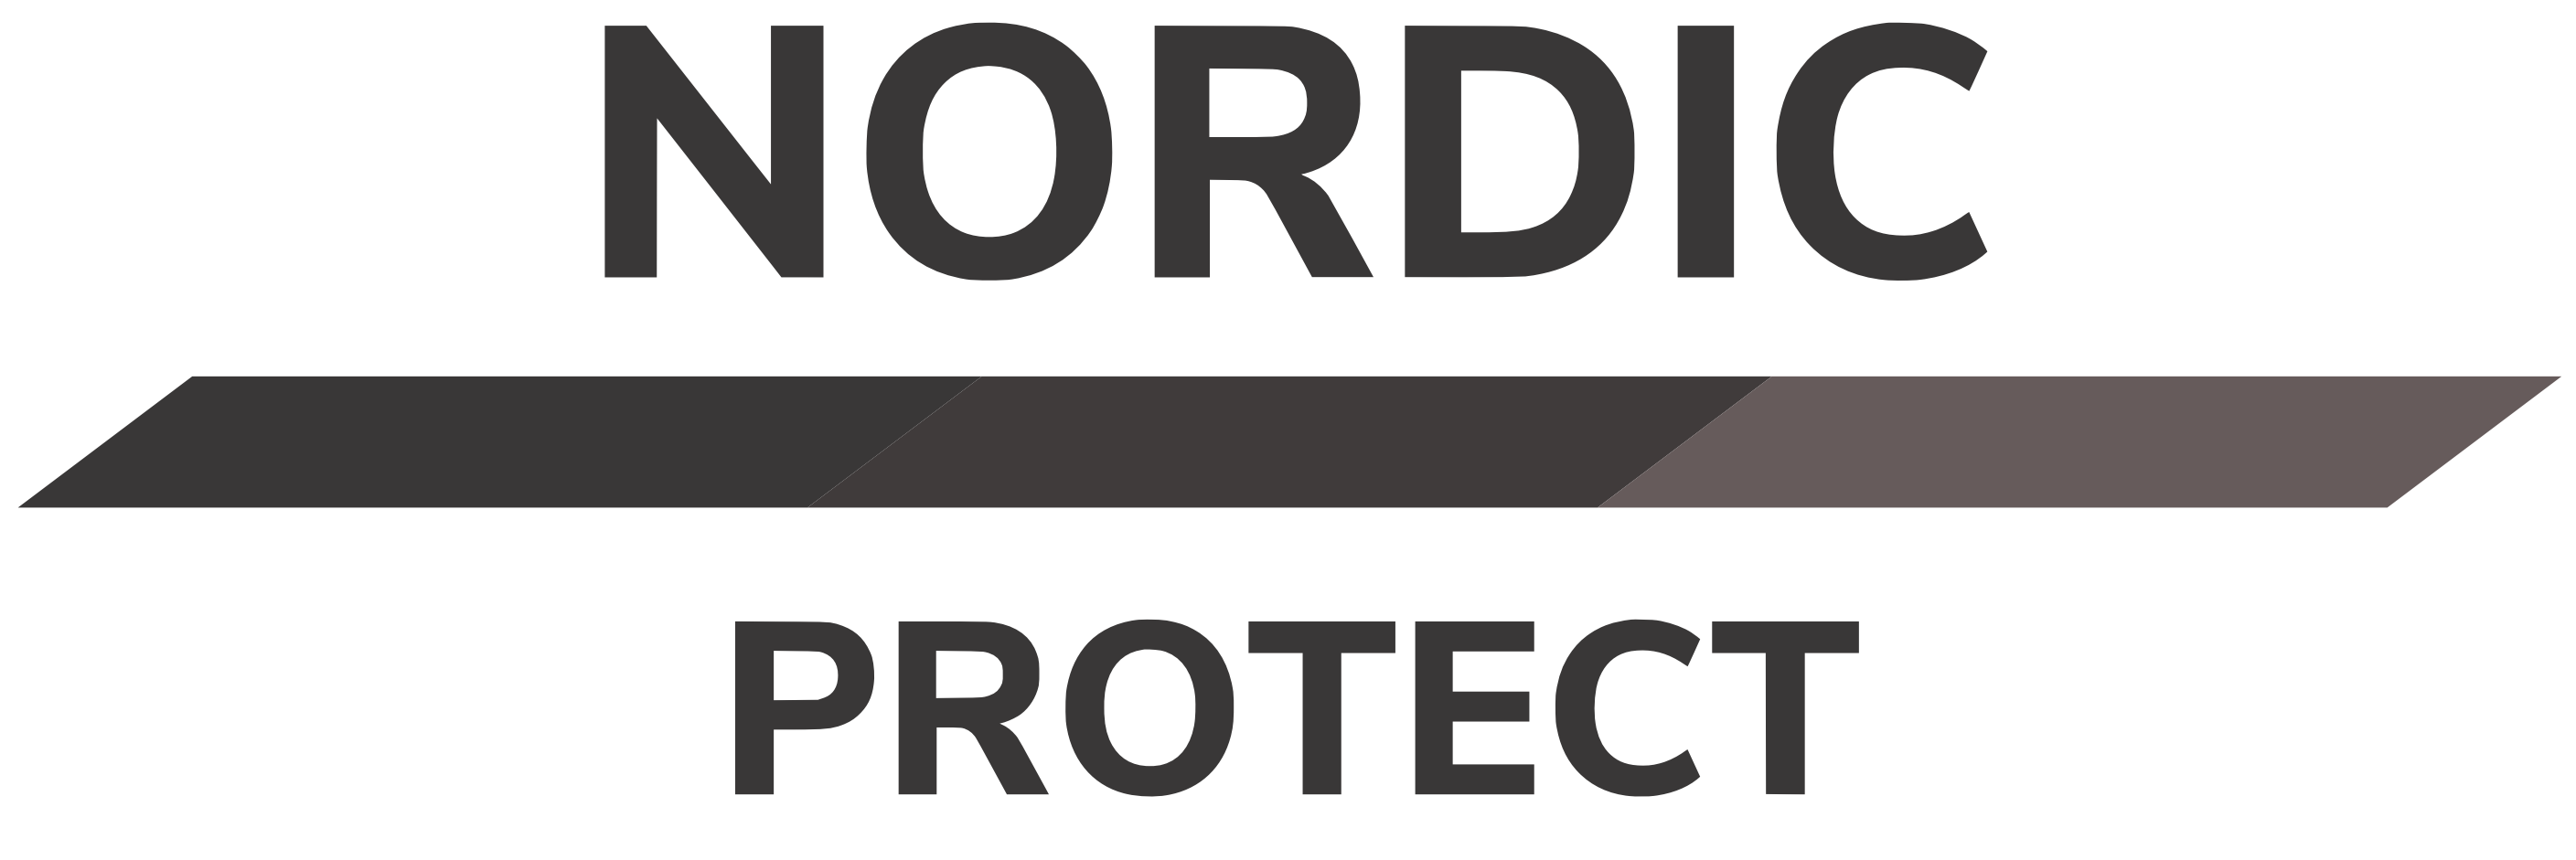 Nordic Protect